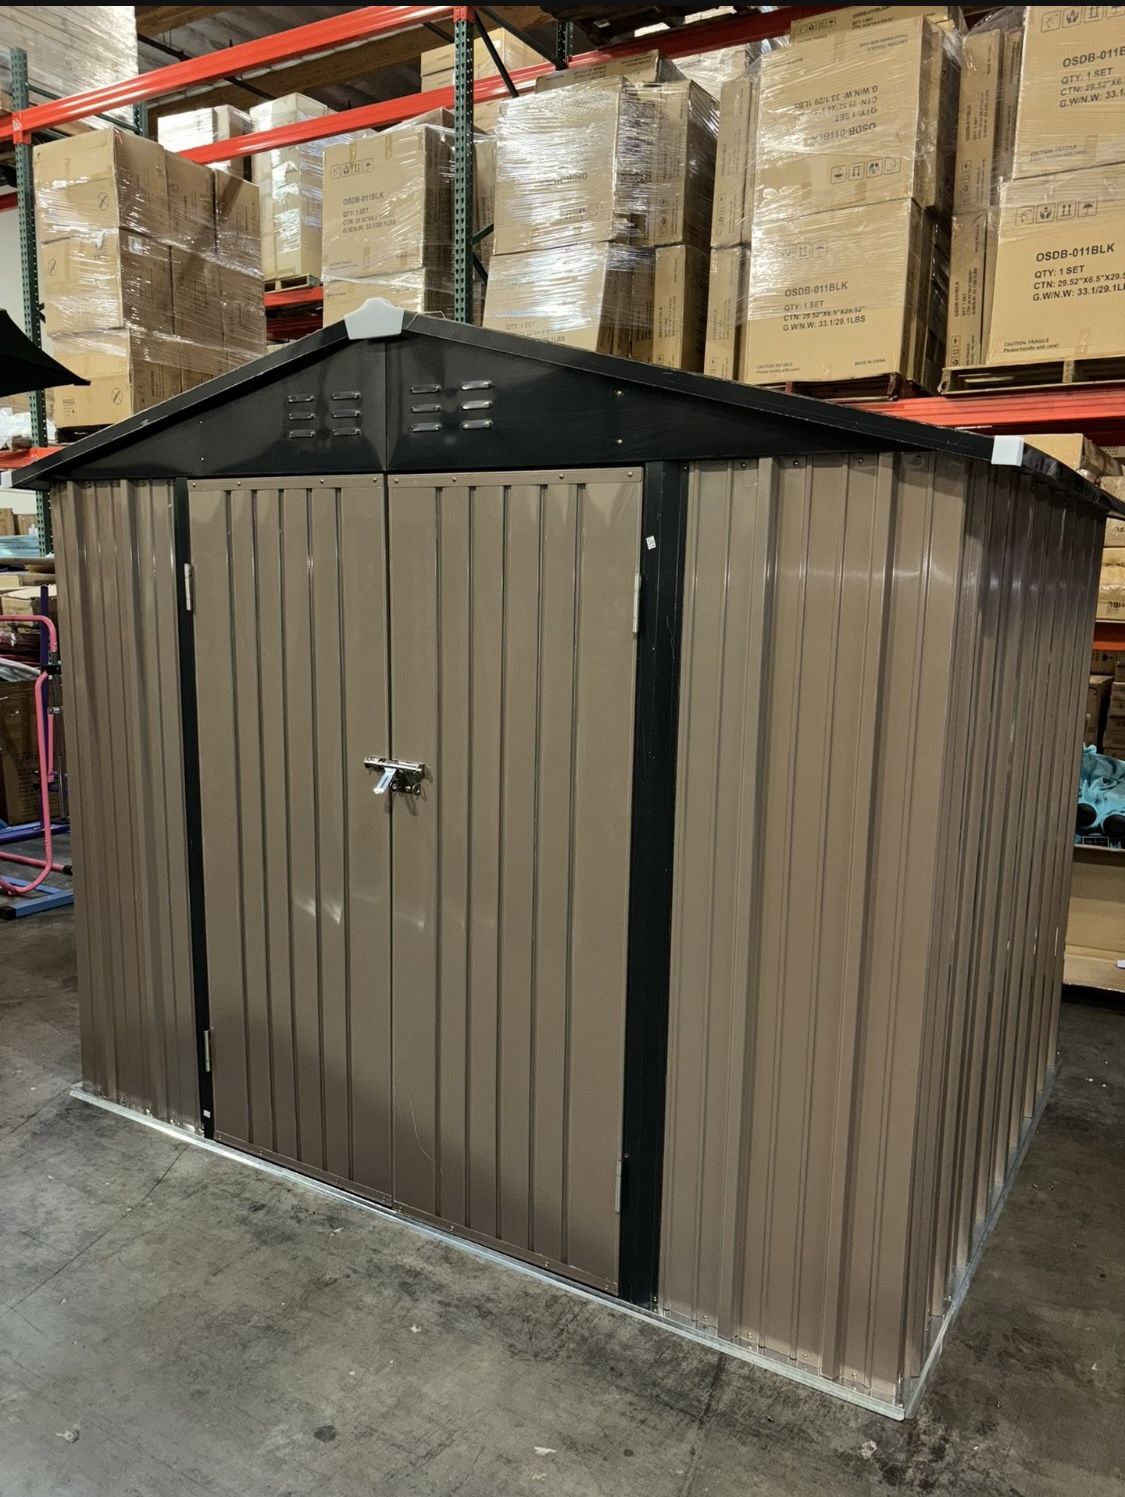 Metal Shed 4x6 Brand New  Yard Lawn Garden Storage  Assemble required 